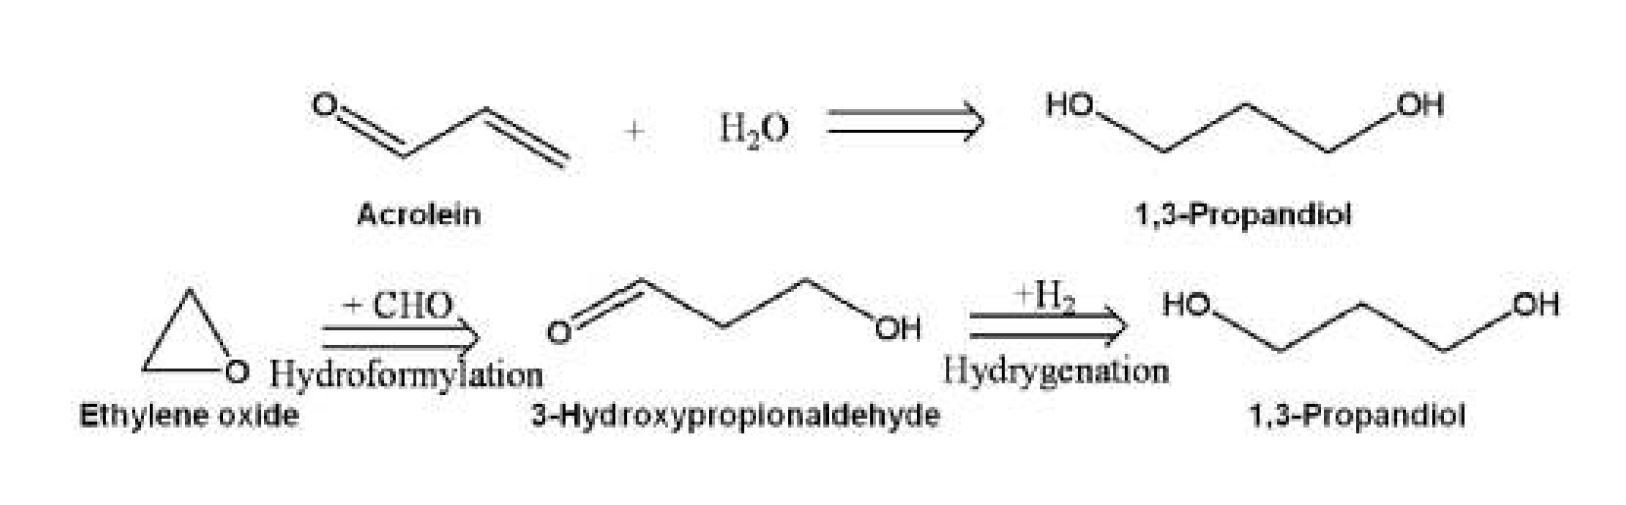 Fig. 1. Chemical conversion of acrolein and ethylene oxide to 1,3-propanediol.